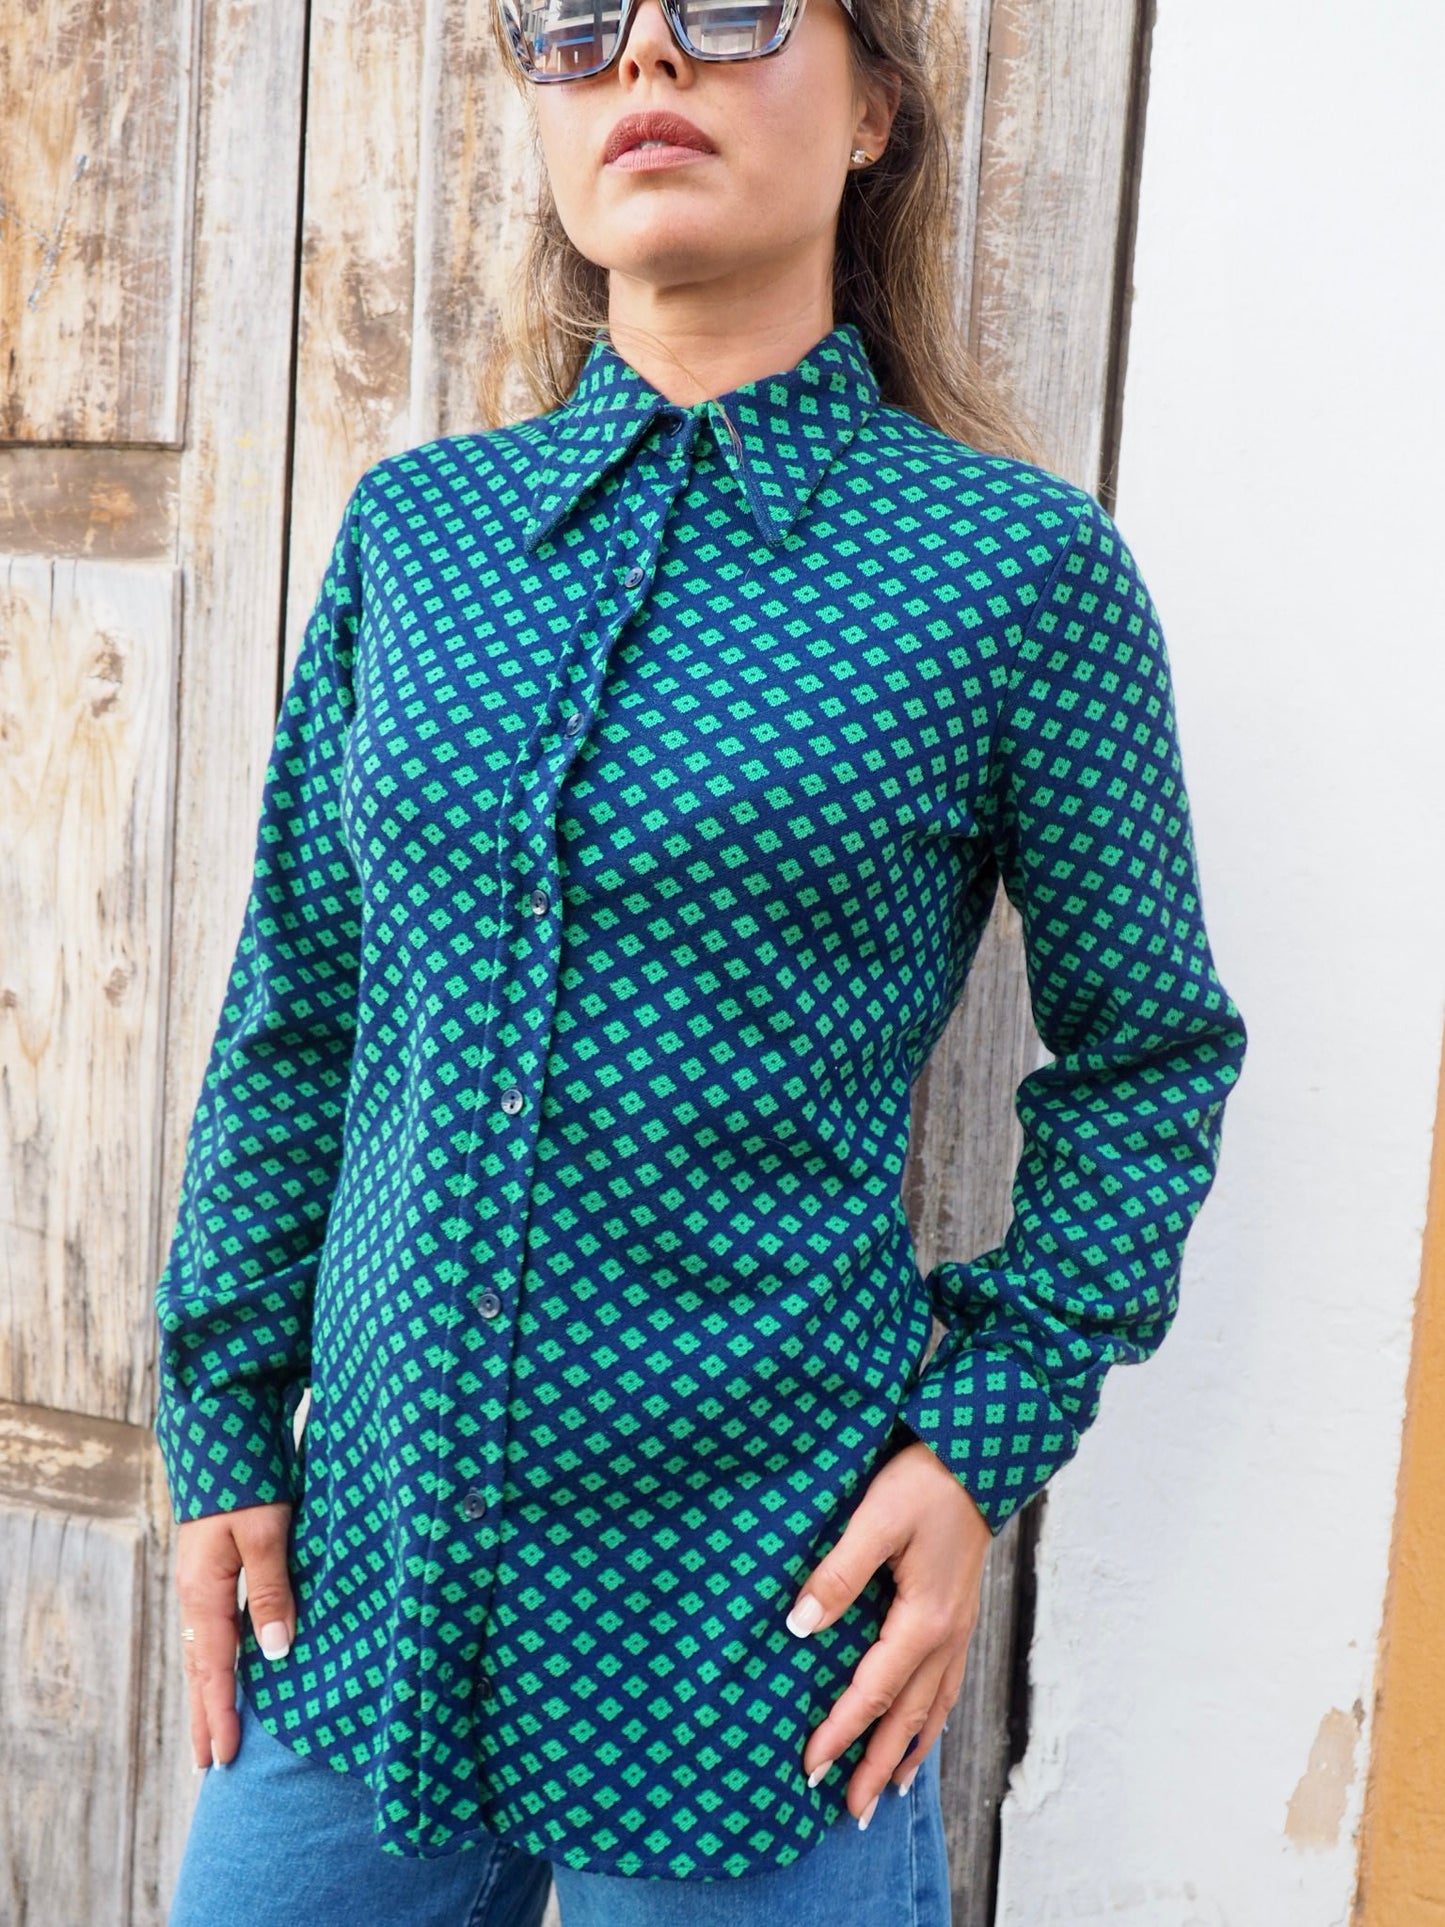 Original vintage 70’s cool printed knitted shirt with large collar in blue and green simple geometric design